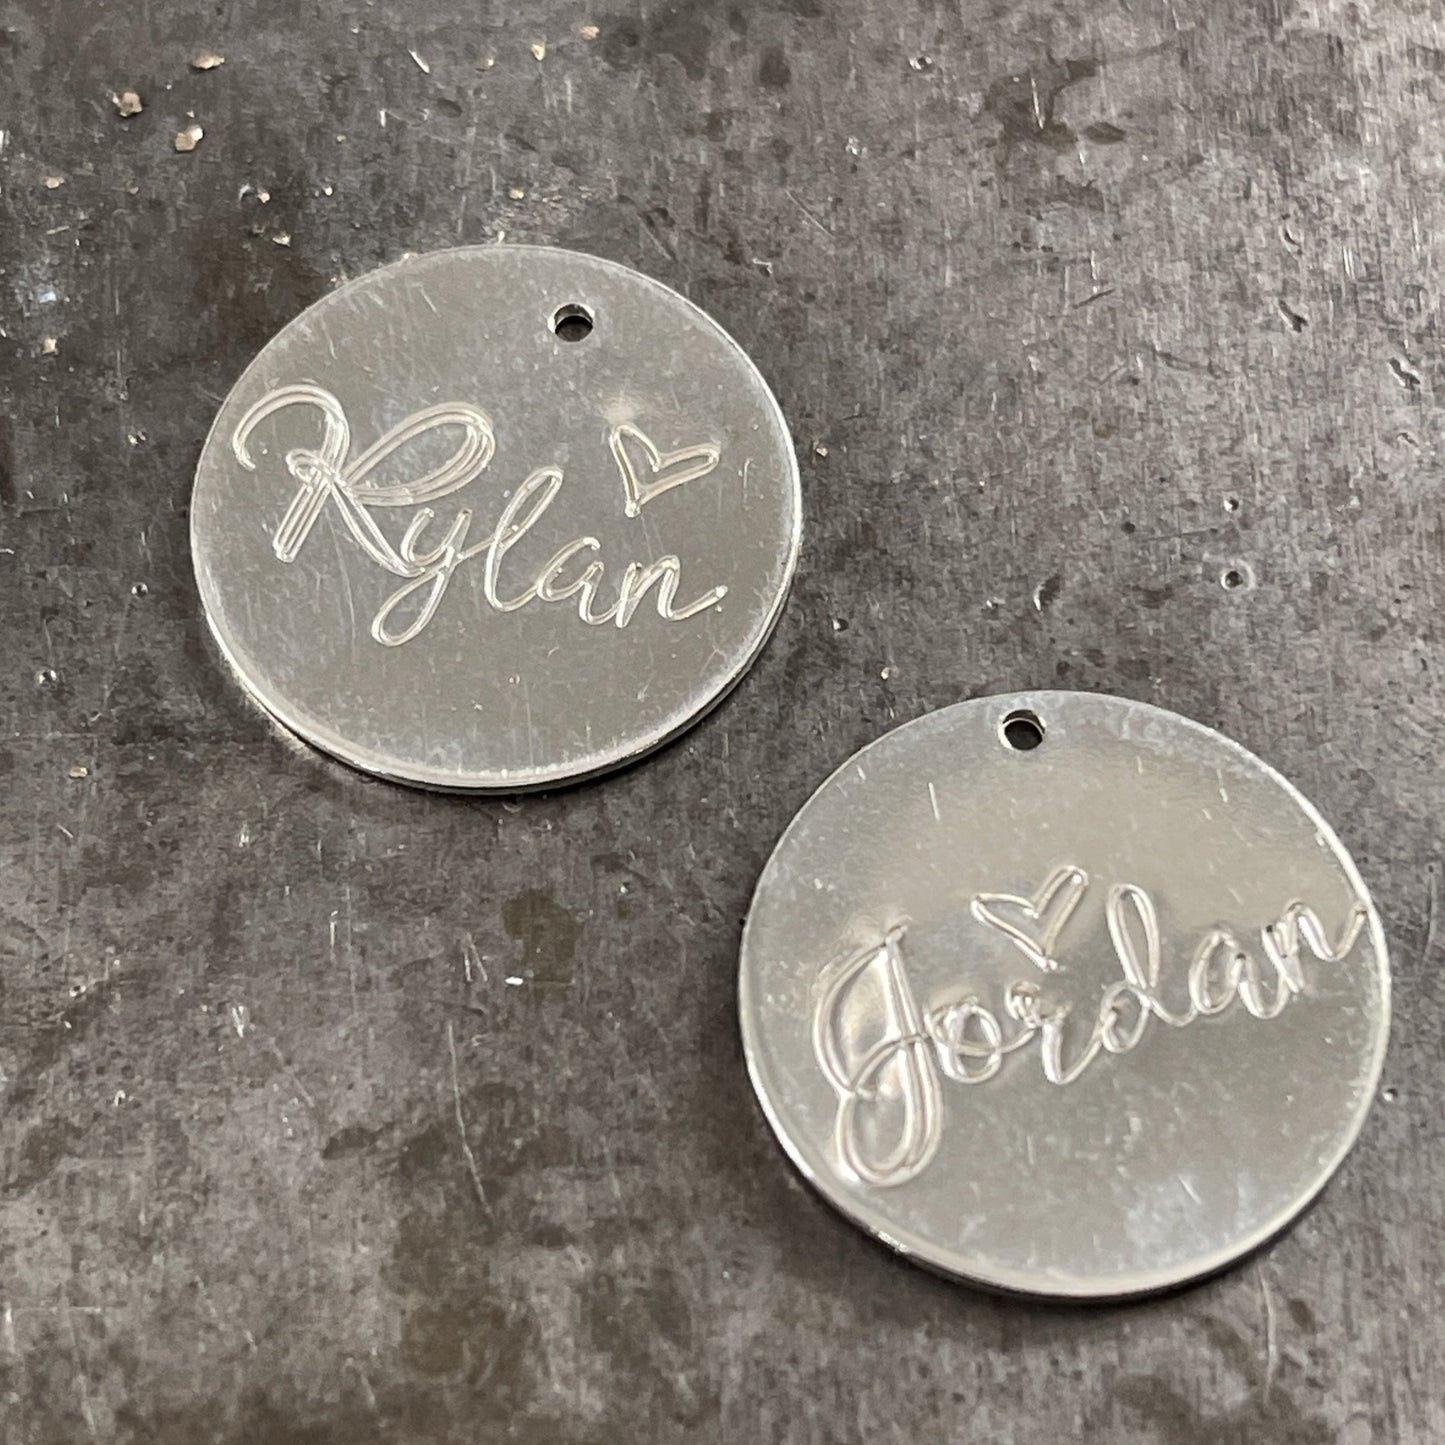 Shown is Among the Wildflowers script font hand stamped on sterling silver disks